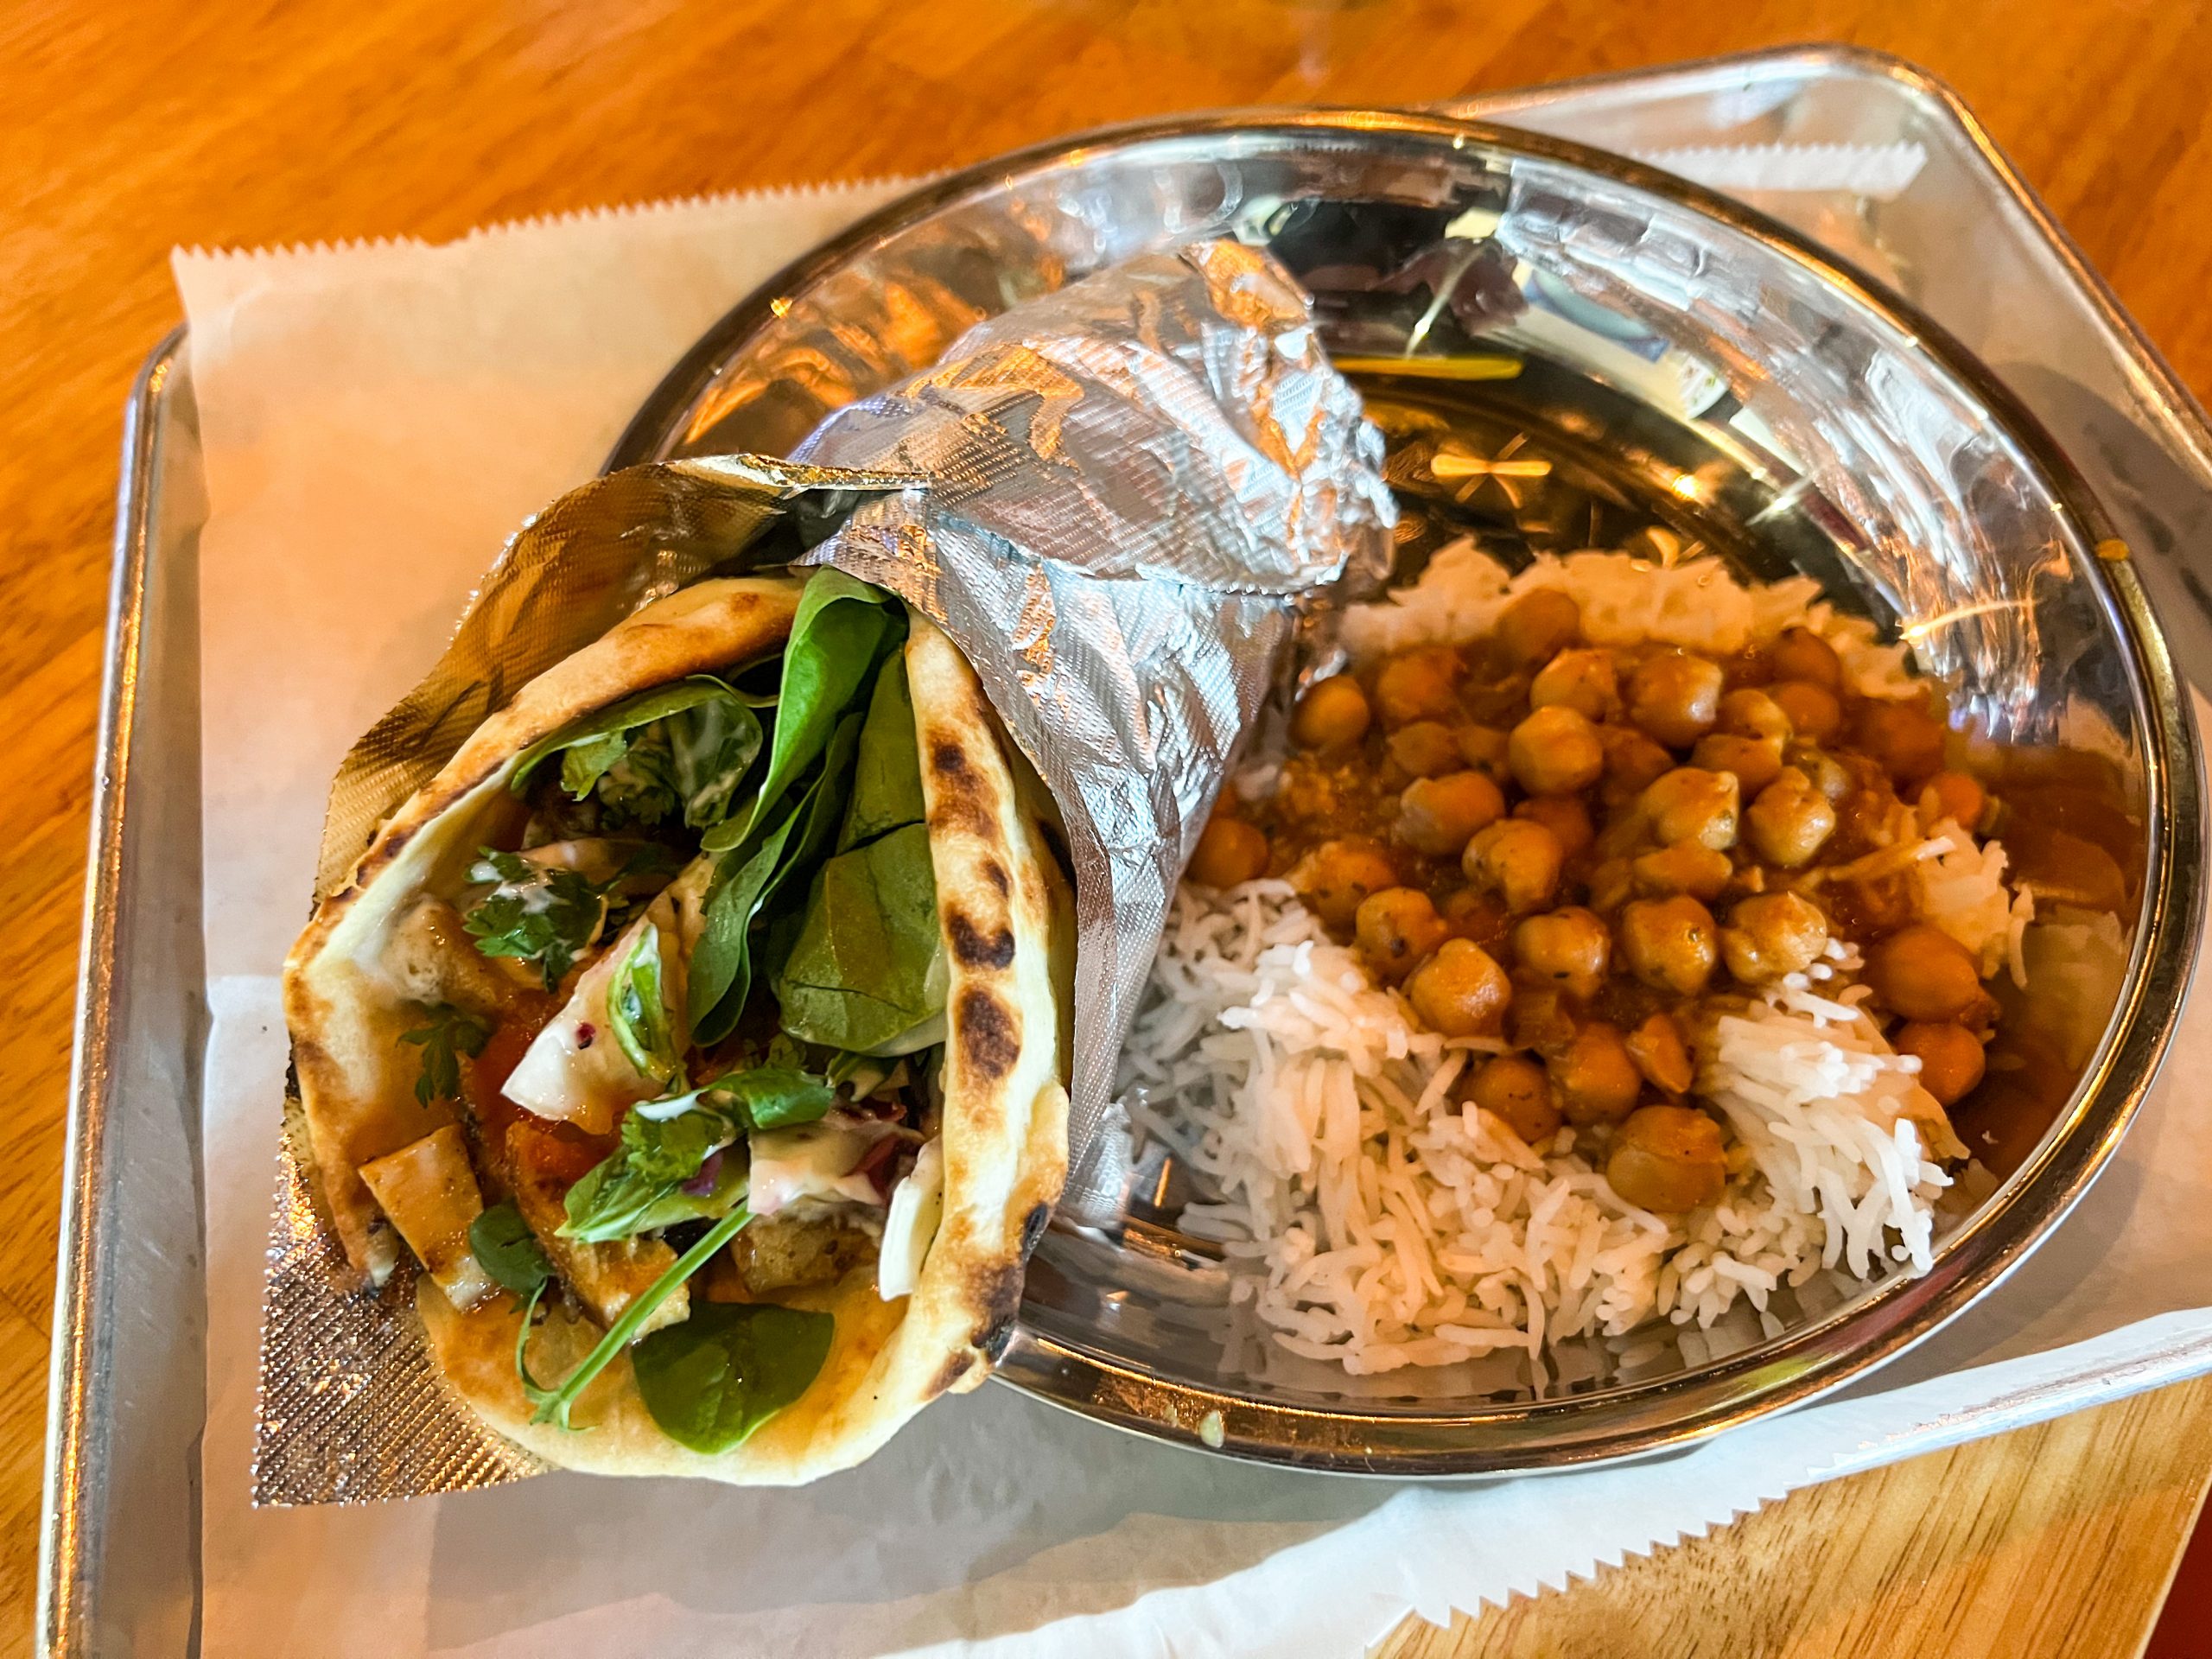 Chicken Tikka Masala Naanwich with a side of chickpeas and rice